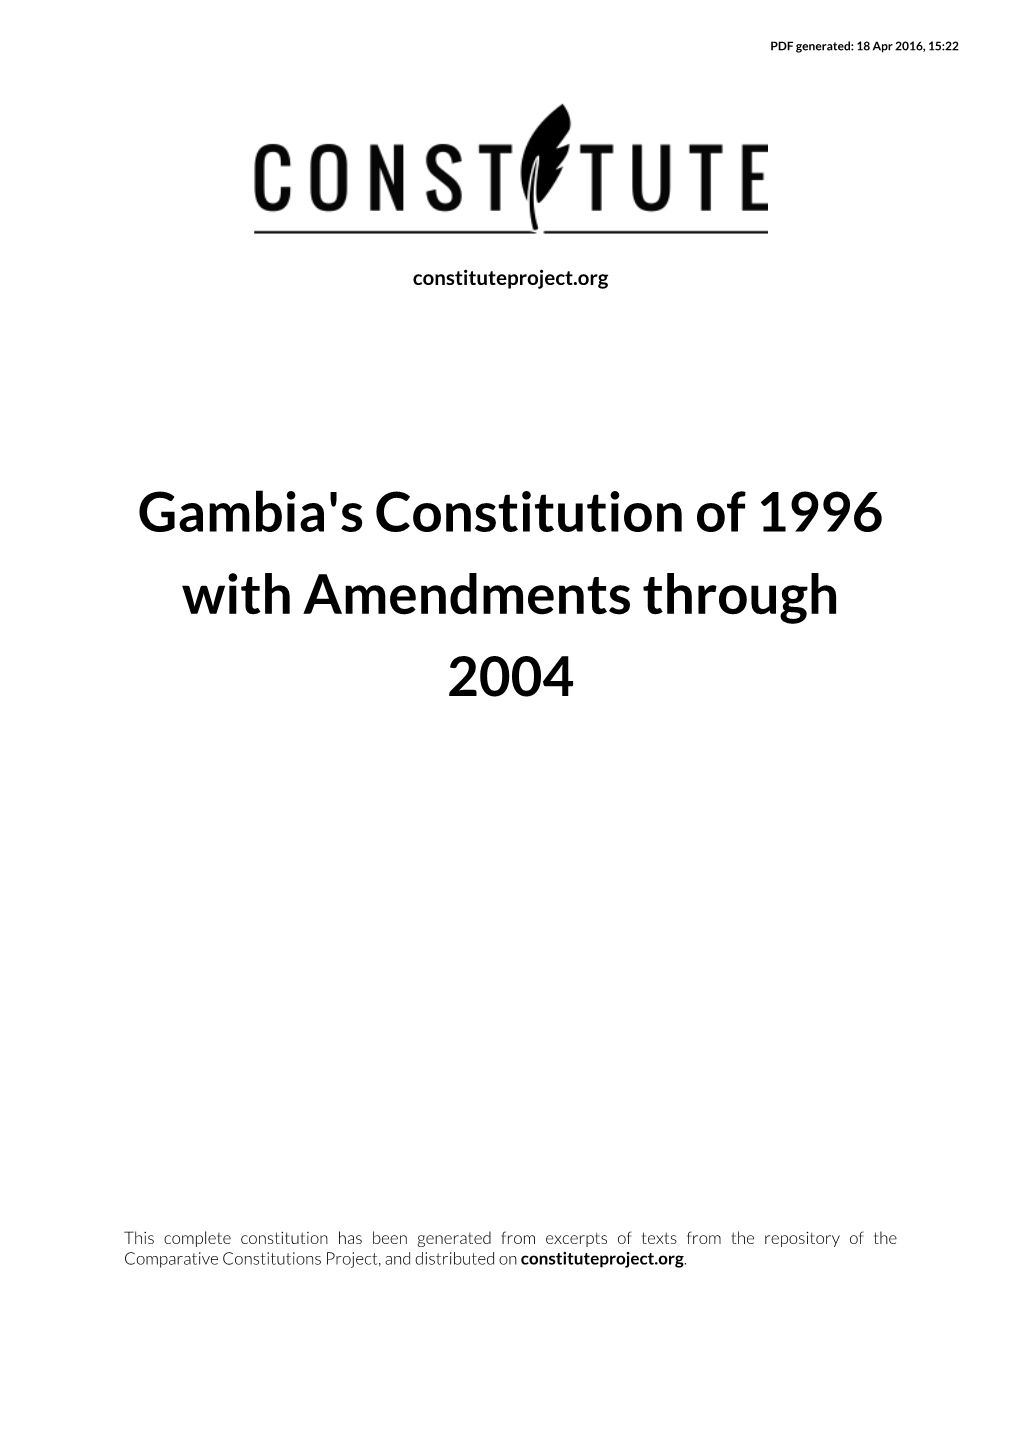 Gambia's Constitution of 1996 with Amendments Through 2004